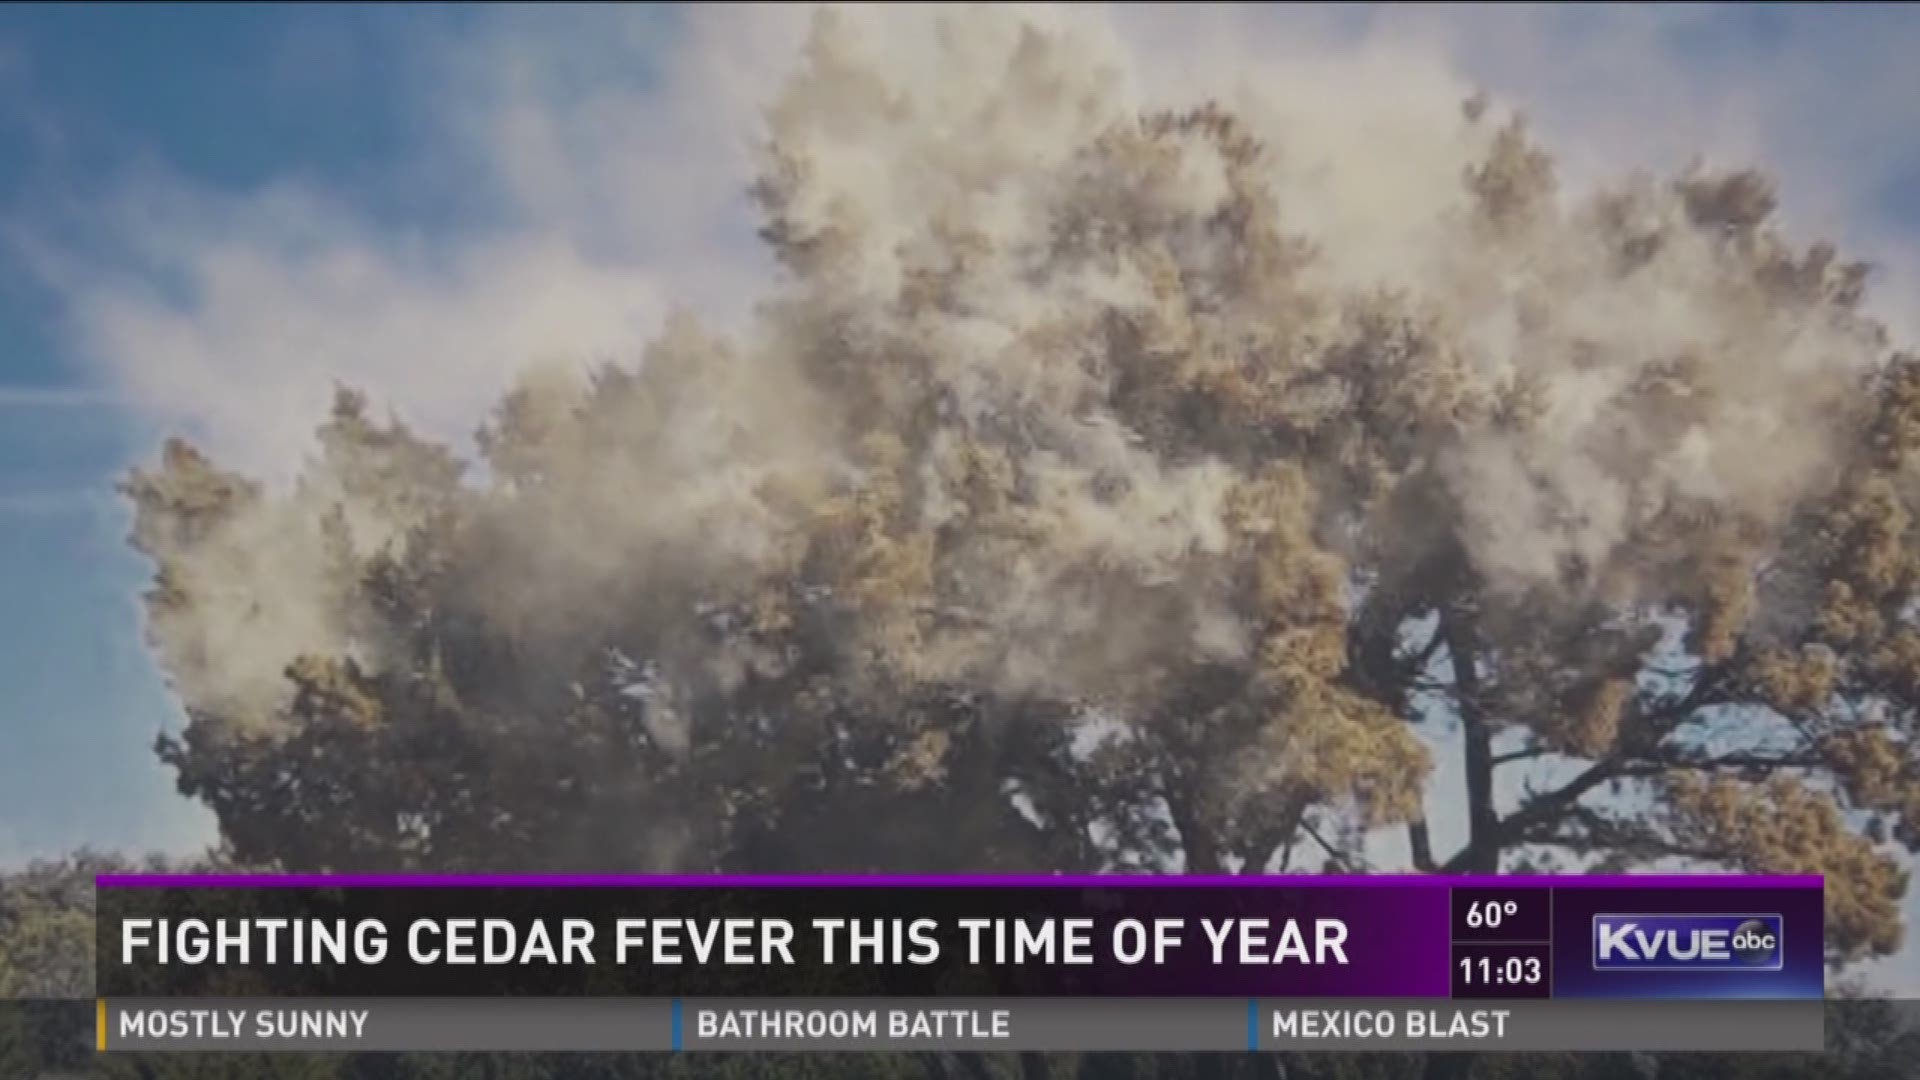 Fighting Cedar Fever this time of year